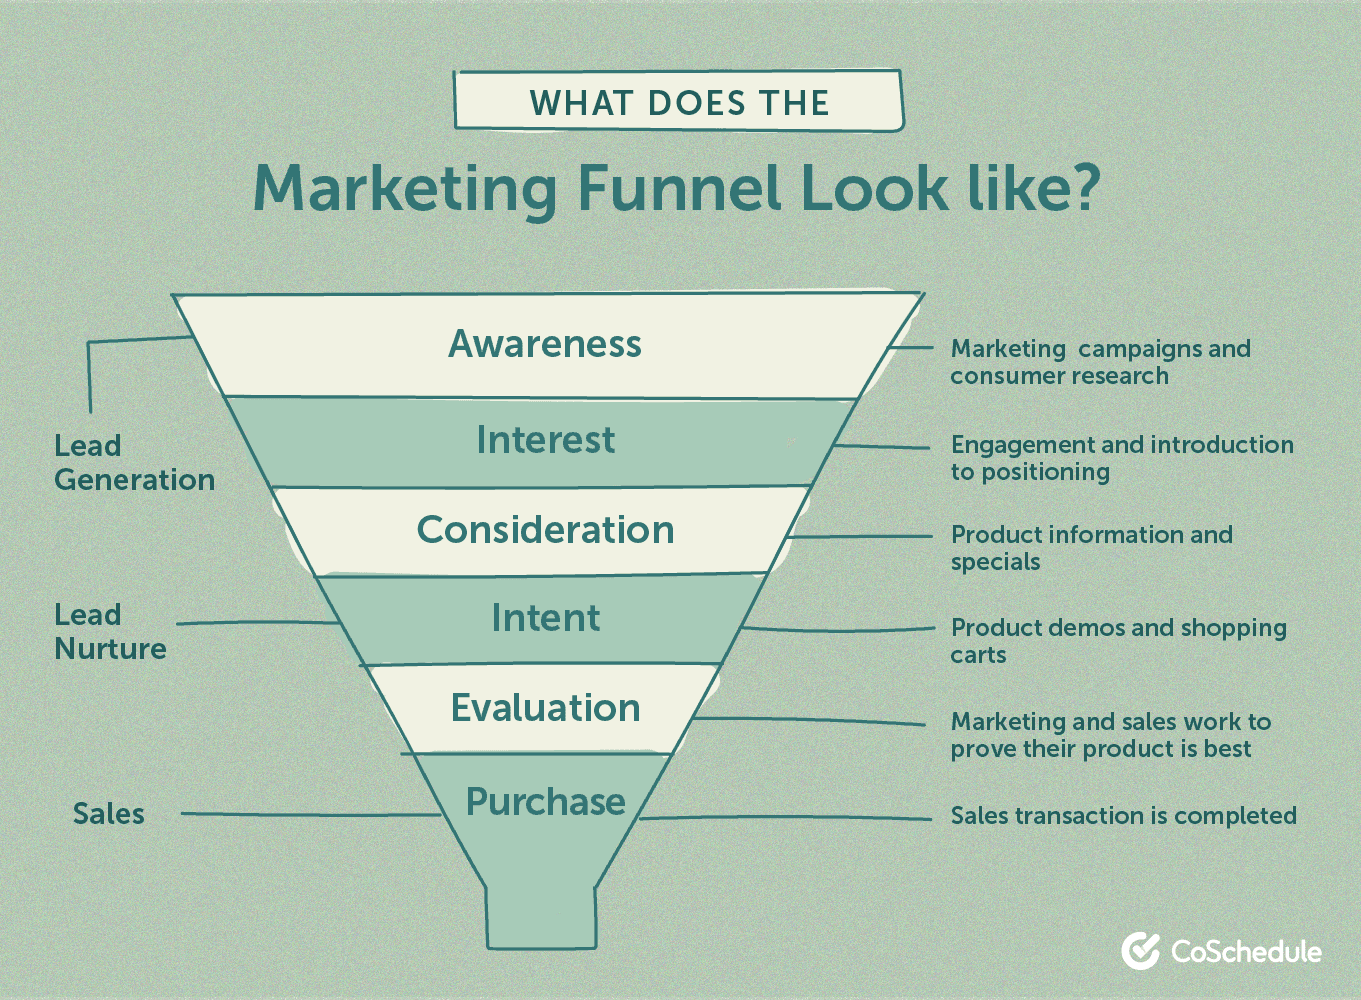 What does the marketing funnel look like?